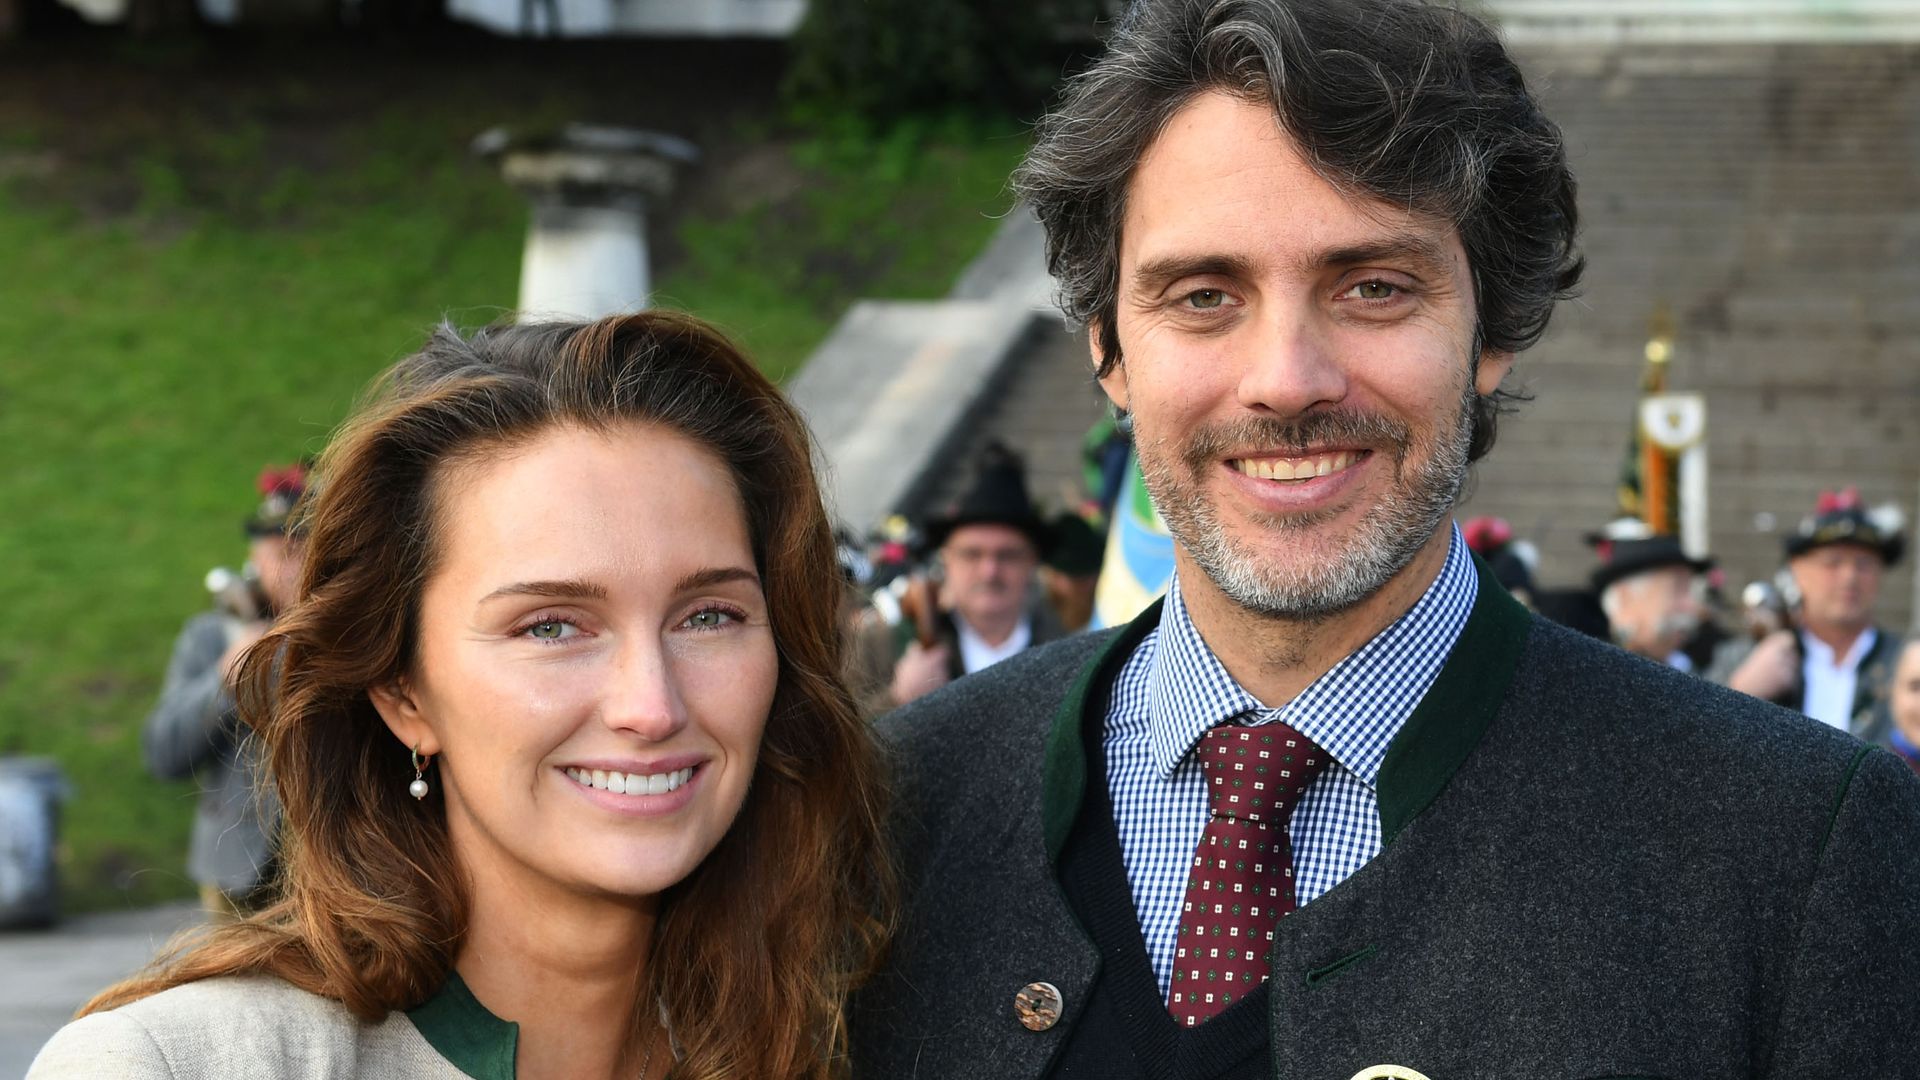 Prince Ludwig of Bavaria and his fiancee Sophie Evekink in traditional outfits at Oktoberfest 